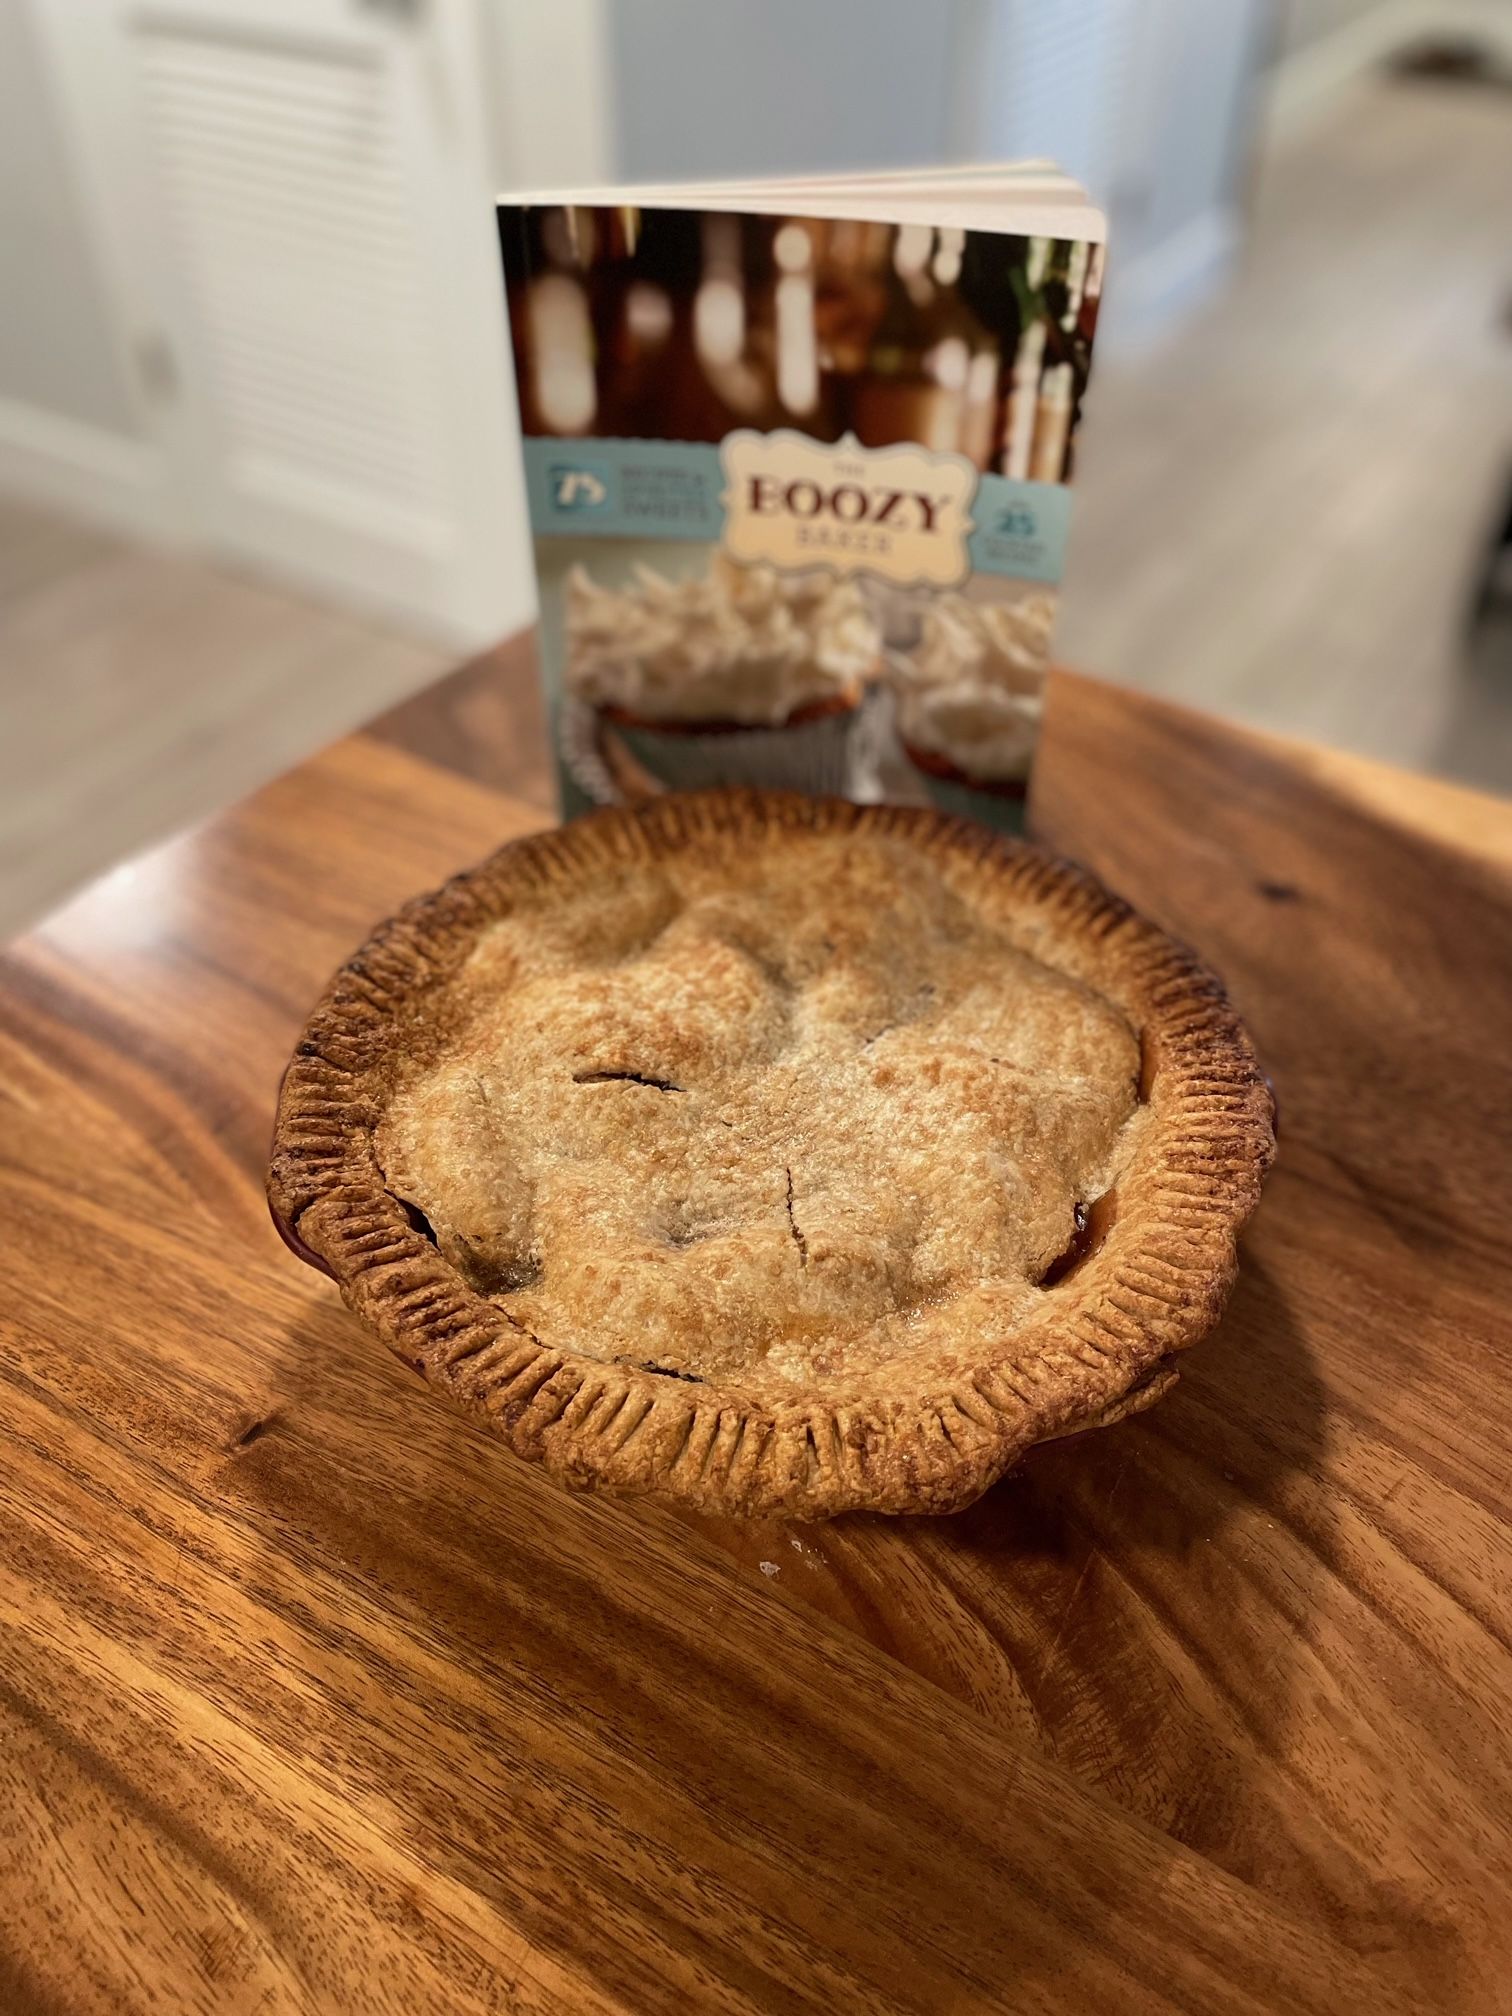 Apple pie with The Boozy Baker cookbook